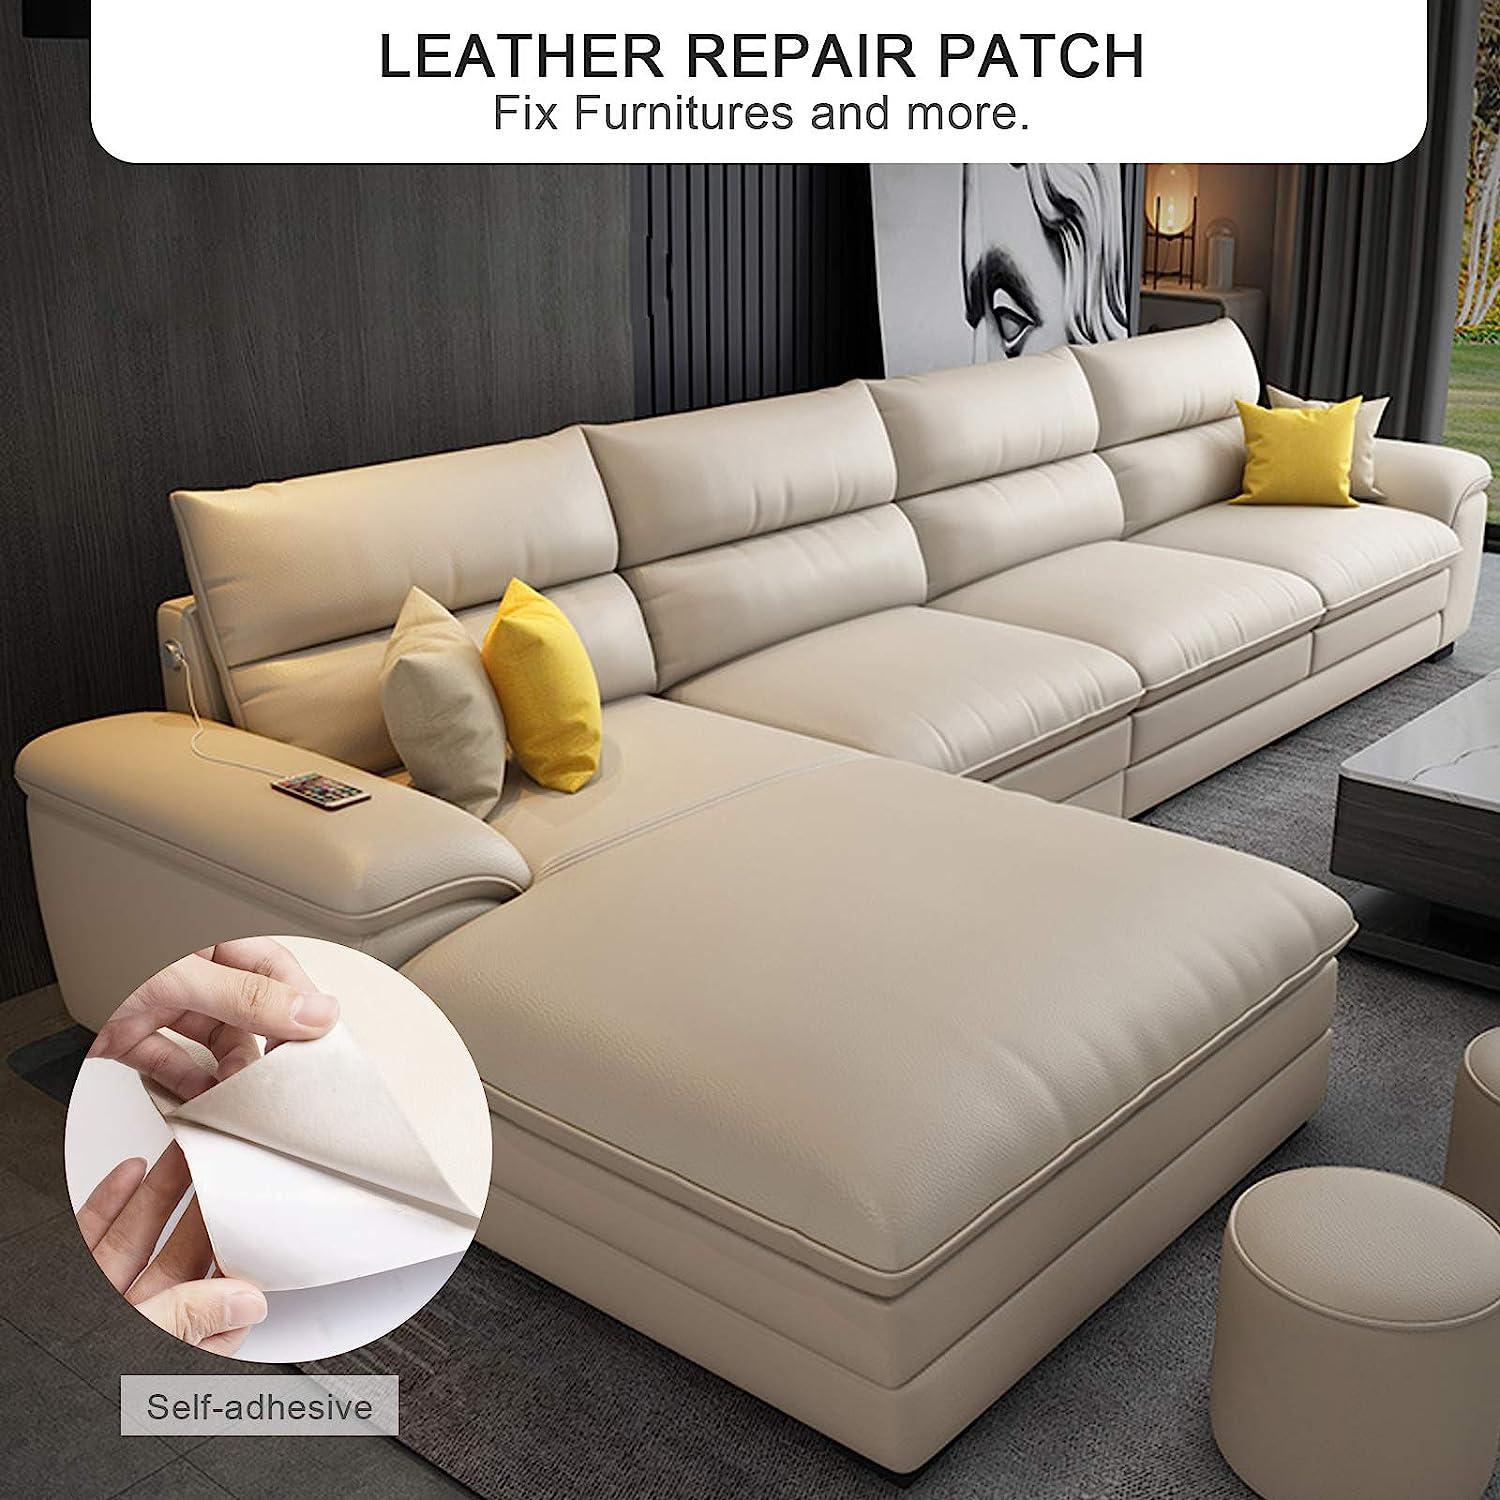 Brown Leather Repair Kits For Couches, Leather Patch, Vinyl Repair